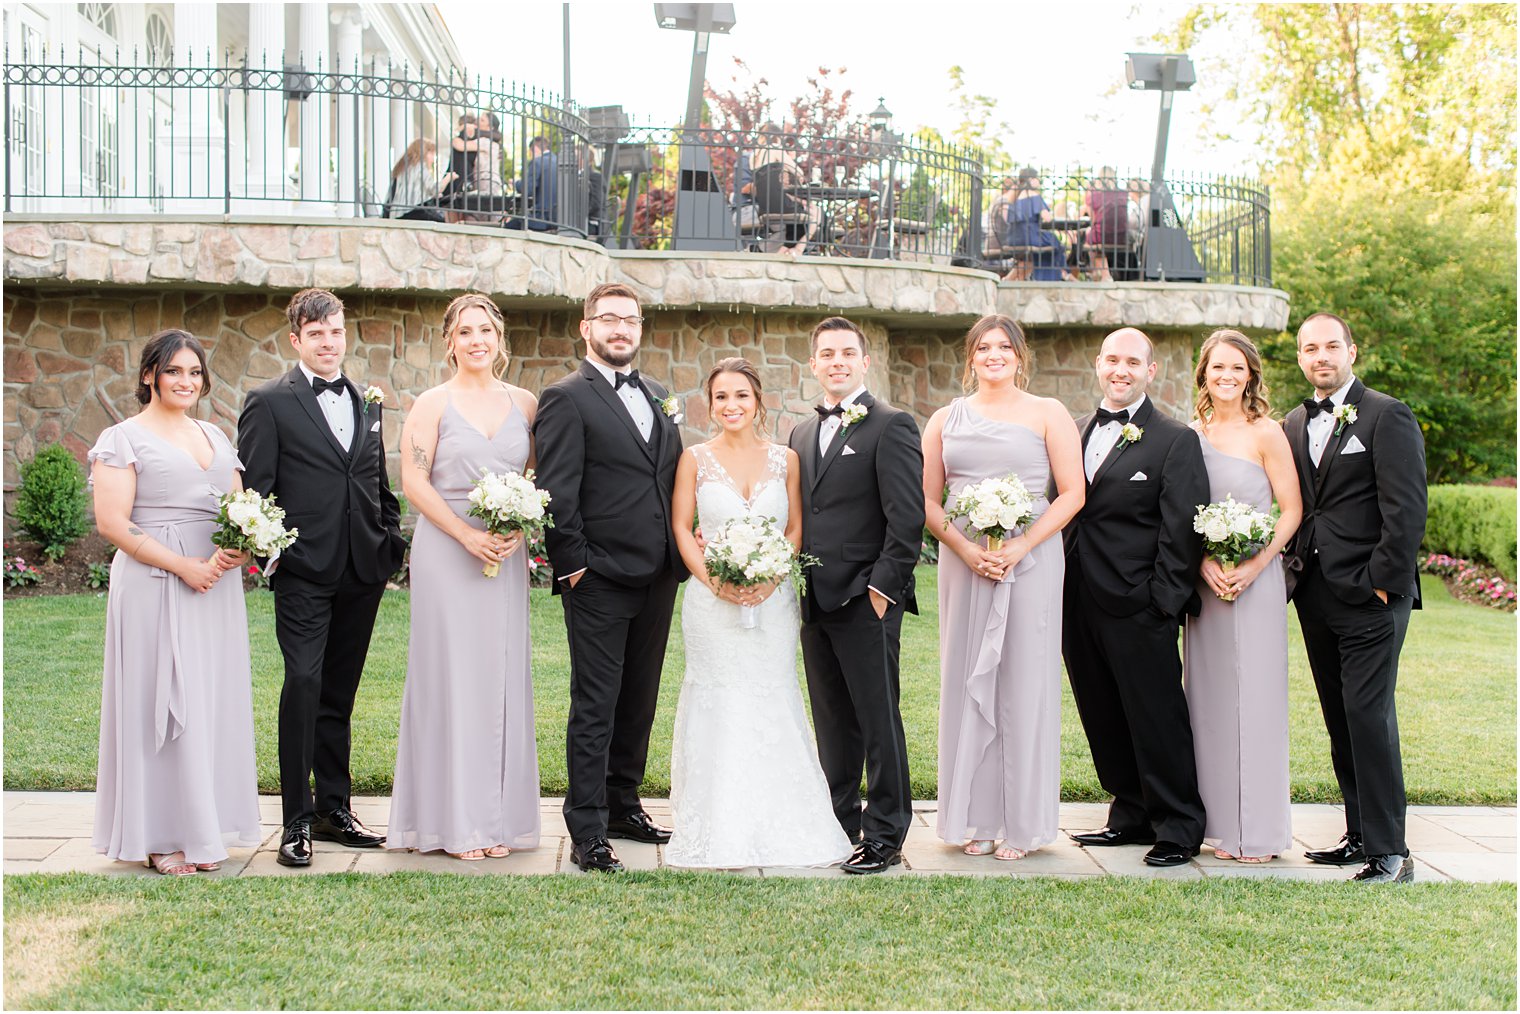 bride and groom pose with bridesmaids in pale purple gowns and groomsmen in suits 